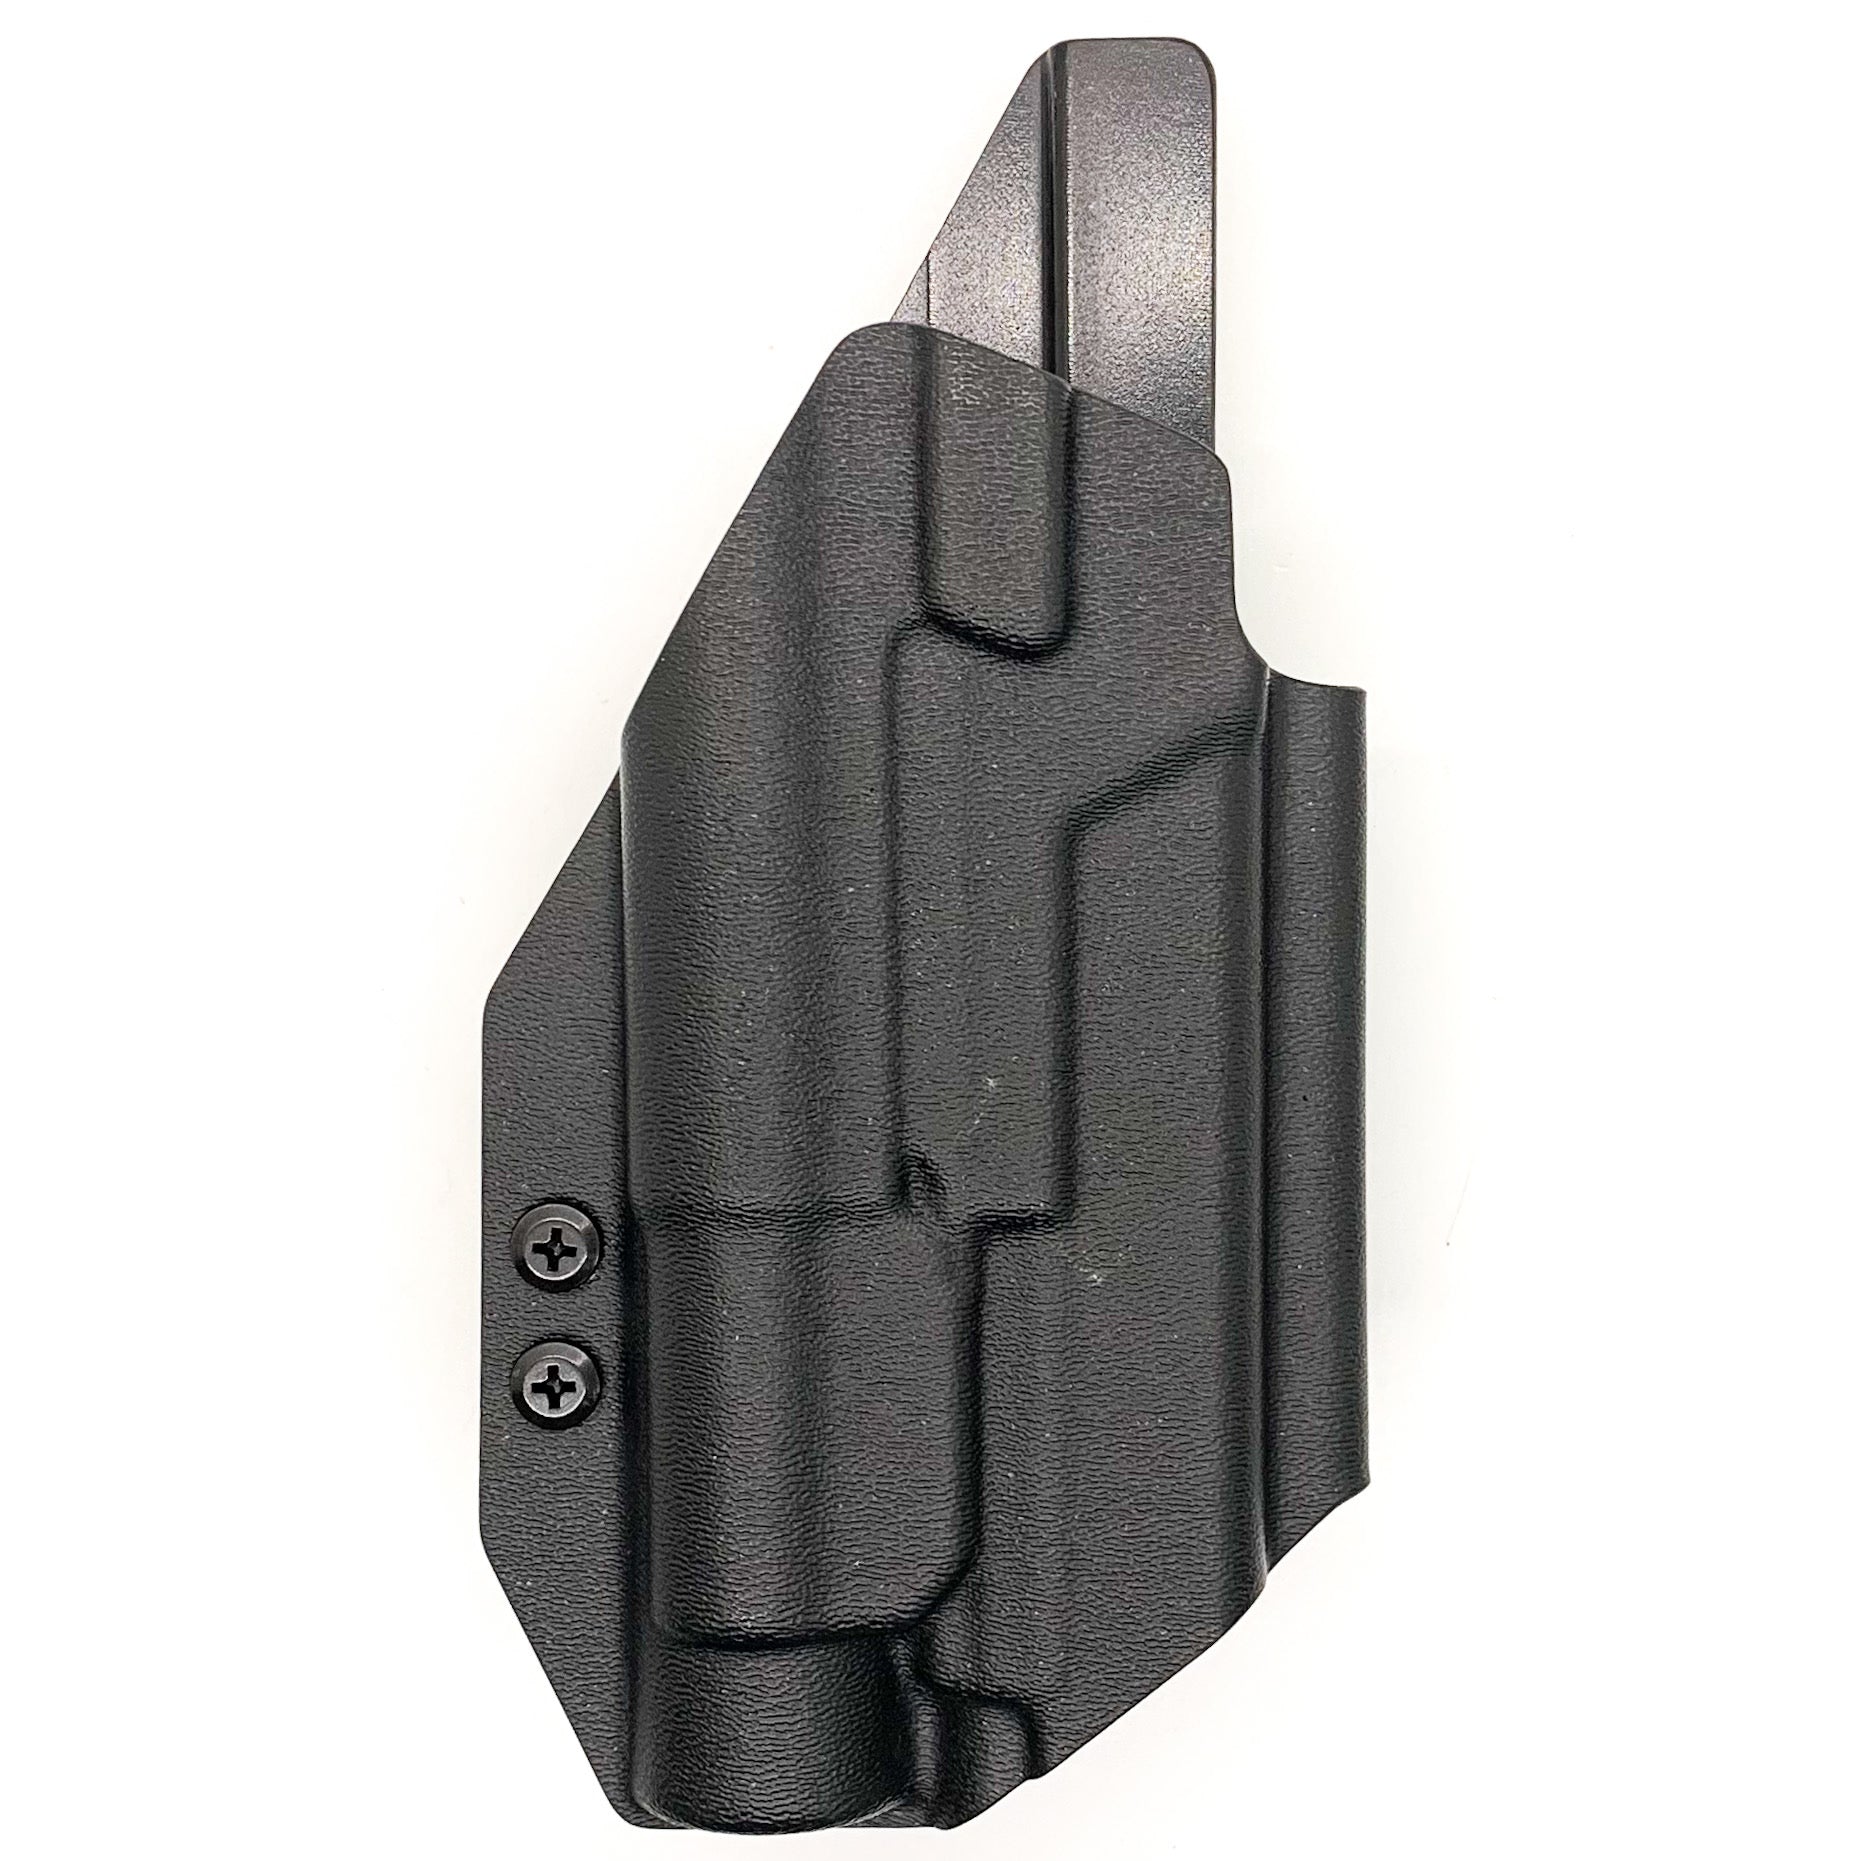 For the best Outside Waistband Taco Style Kydex Holster designed to fit the Glock 19, 19X and 45 Gen 5 pistols with the Streamlight TLR-1 HL, shop Four Brothers Holsters. Full sweat guard, adjustable retention, open muzzle for threaded barrels, cleared for red dot sights.  Proudly made in the United States.